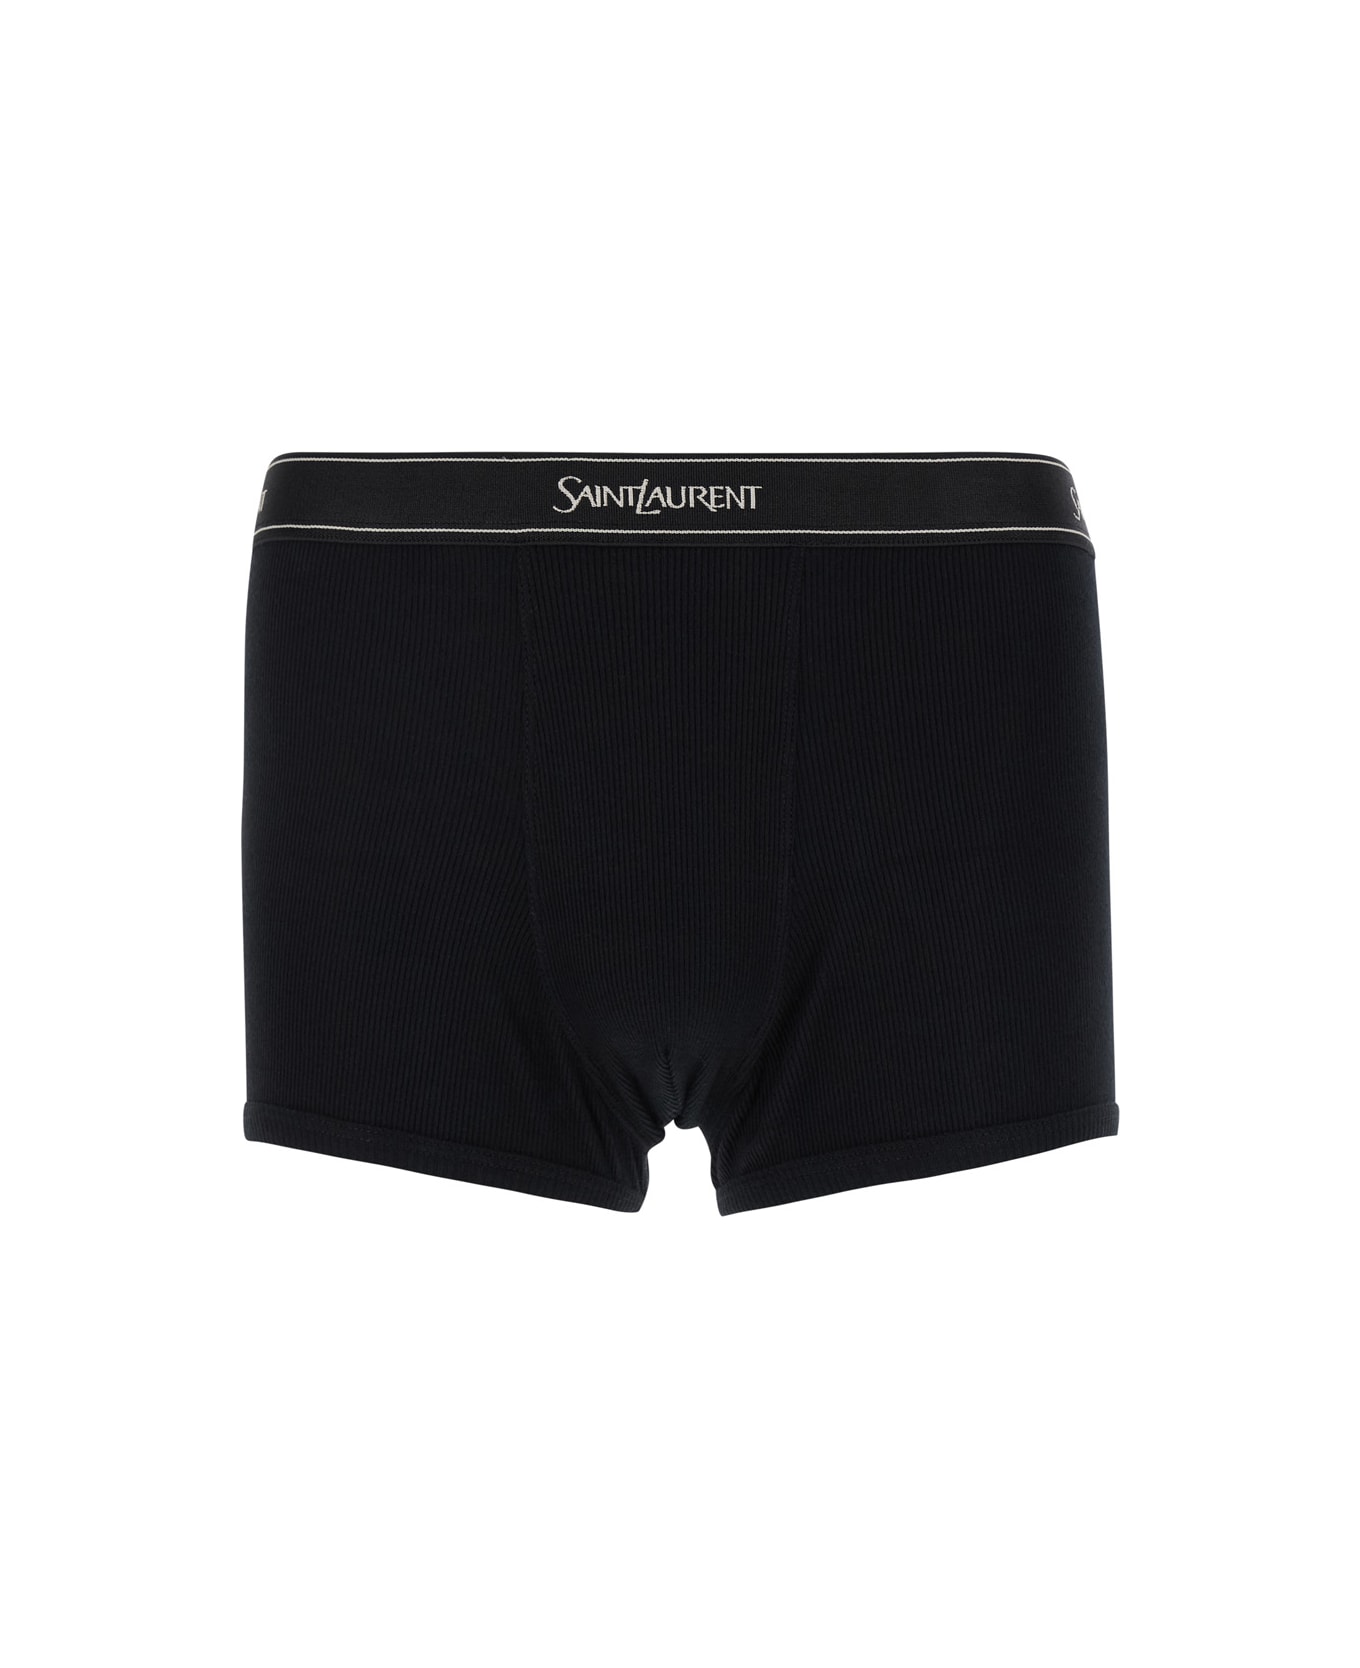 Saint Laurent Black Boxer Briefs With Logo Lettering Embroidery In Ribbed Cotton Man - Black ショーツ